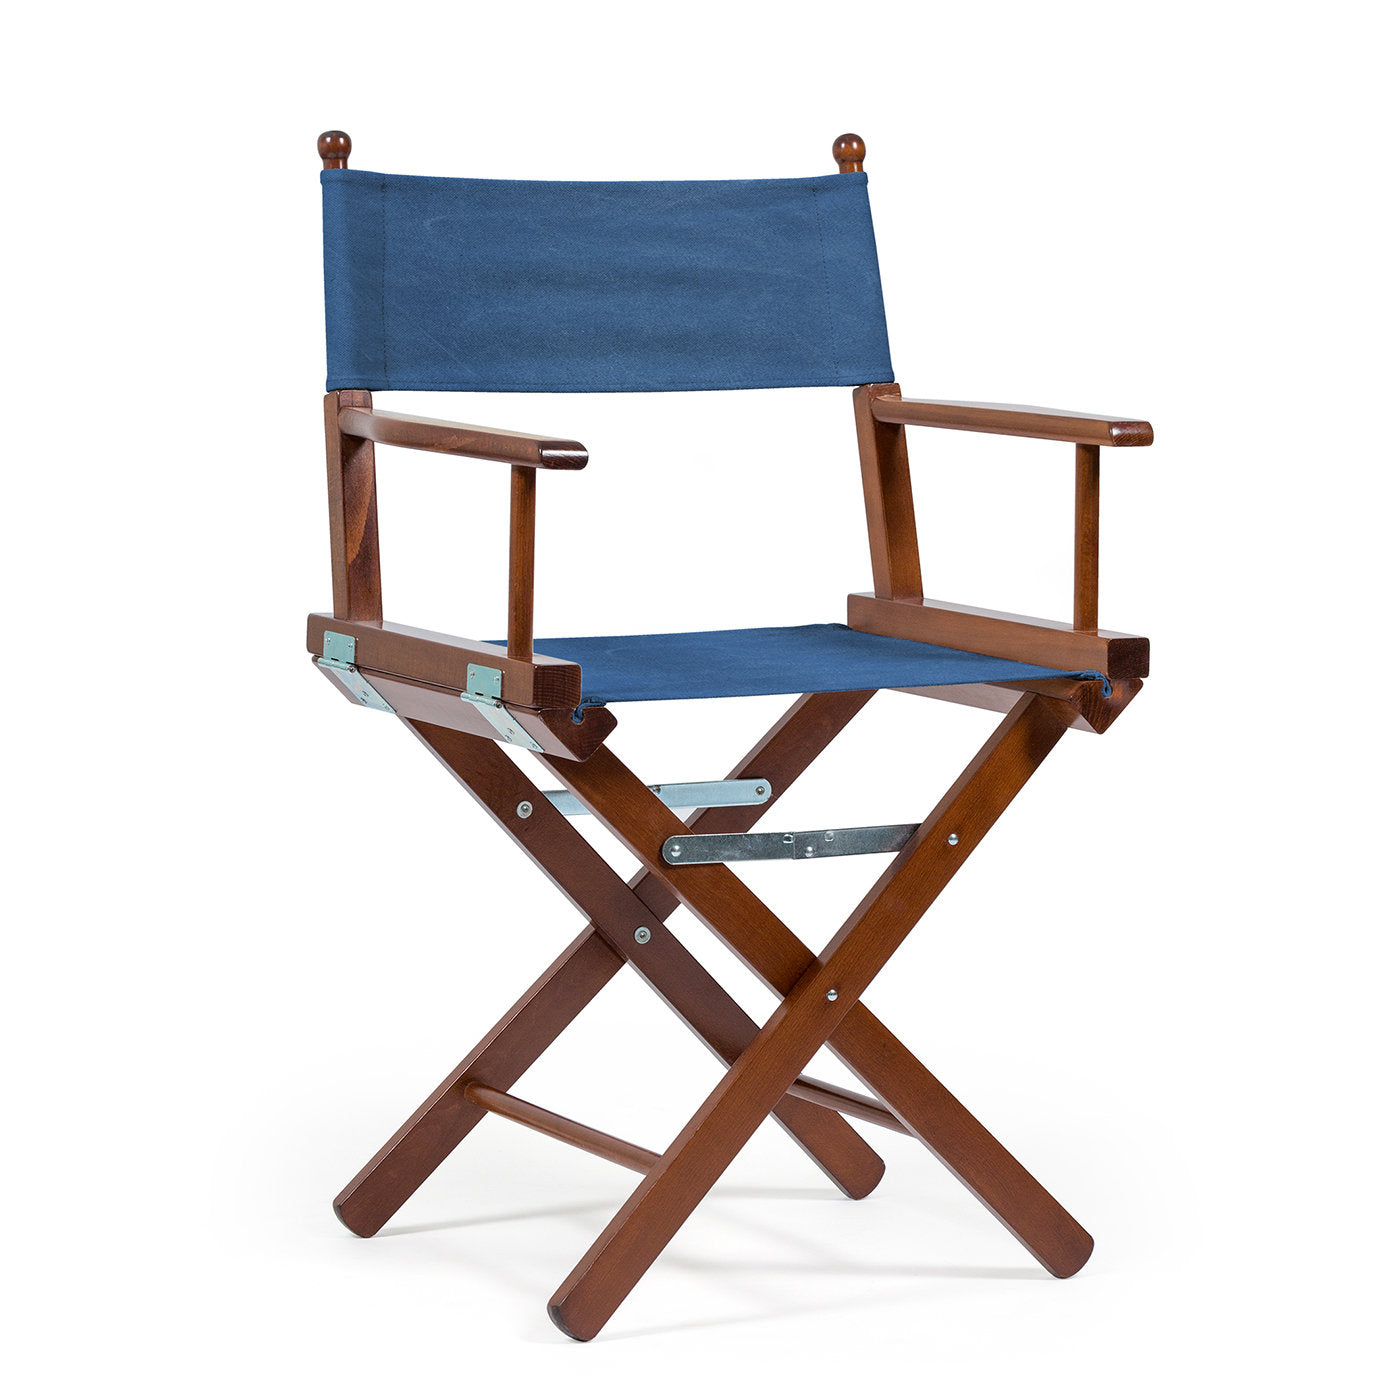 Director's Chair in Jeans Blue - Alternative view 1